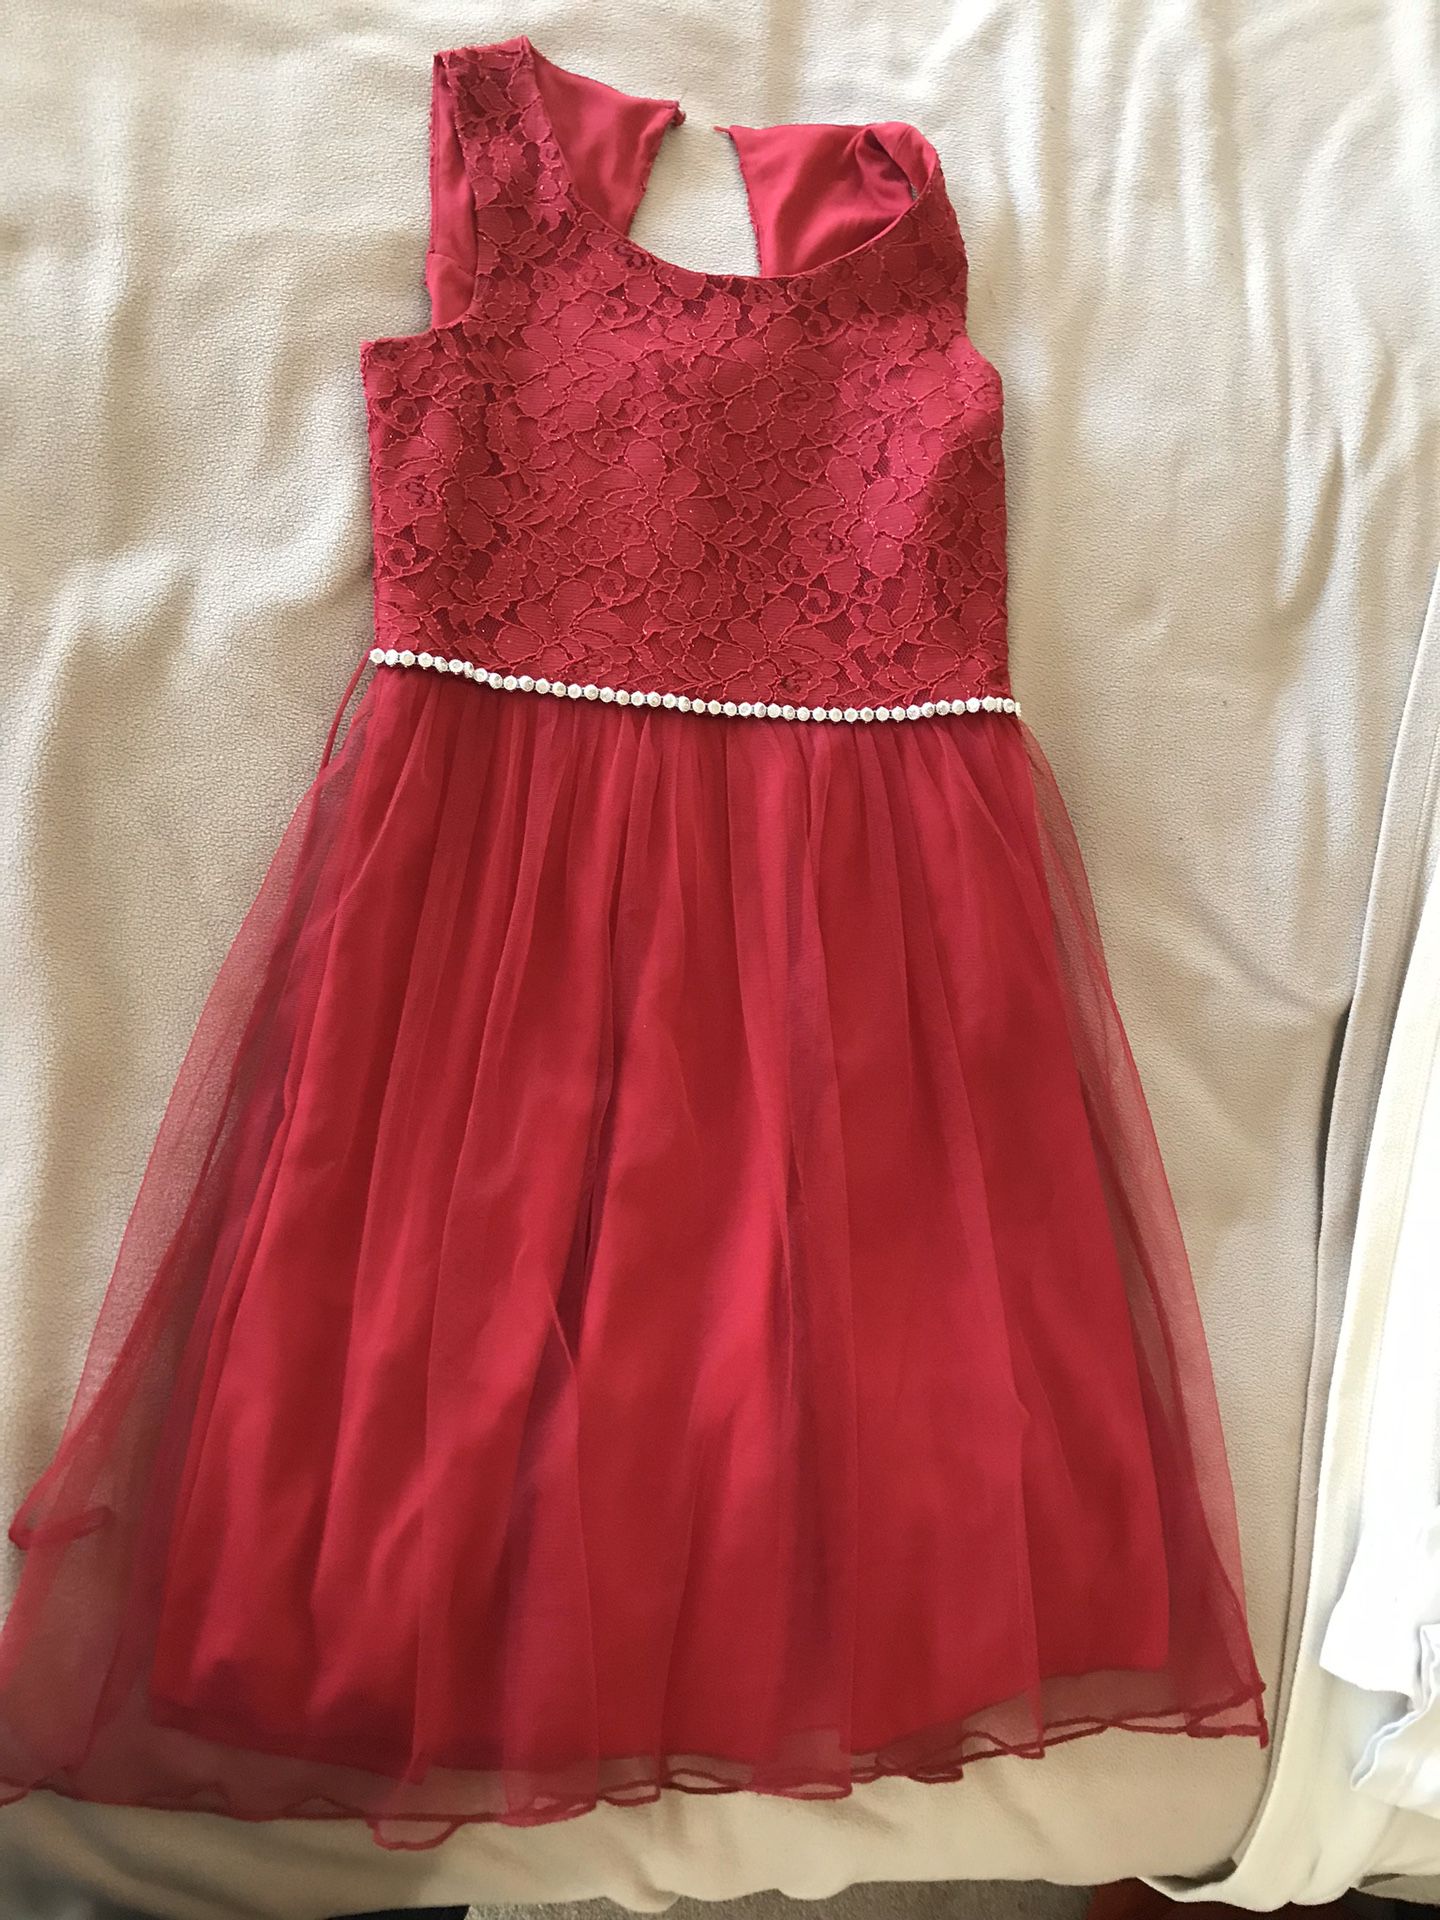 Dress for toddler size16